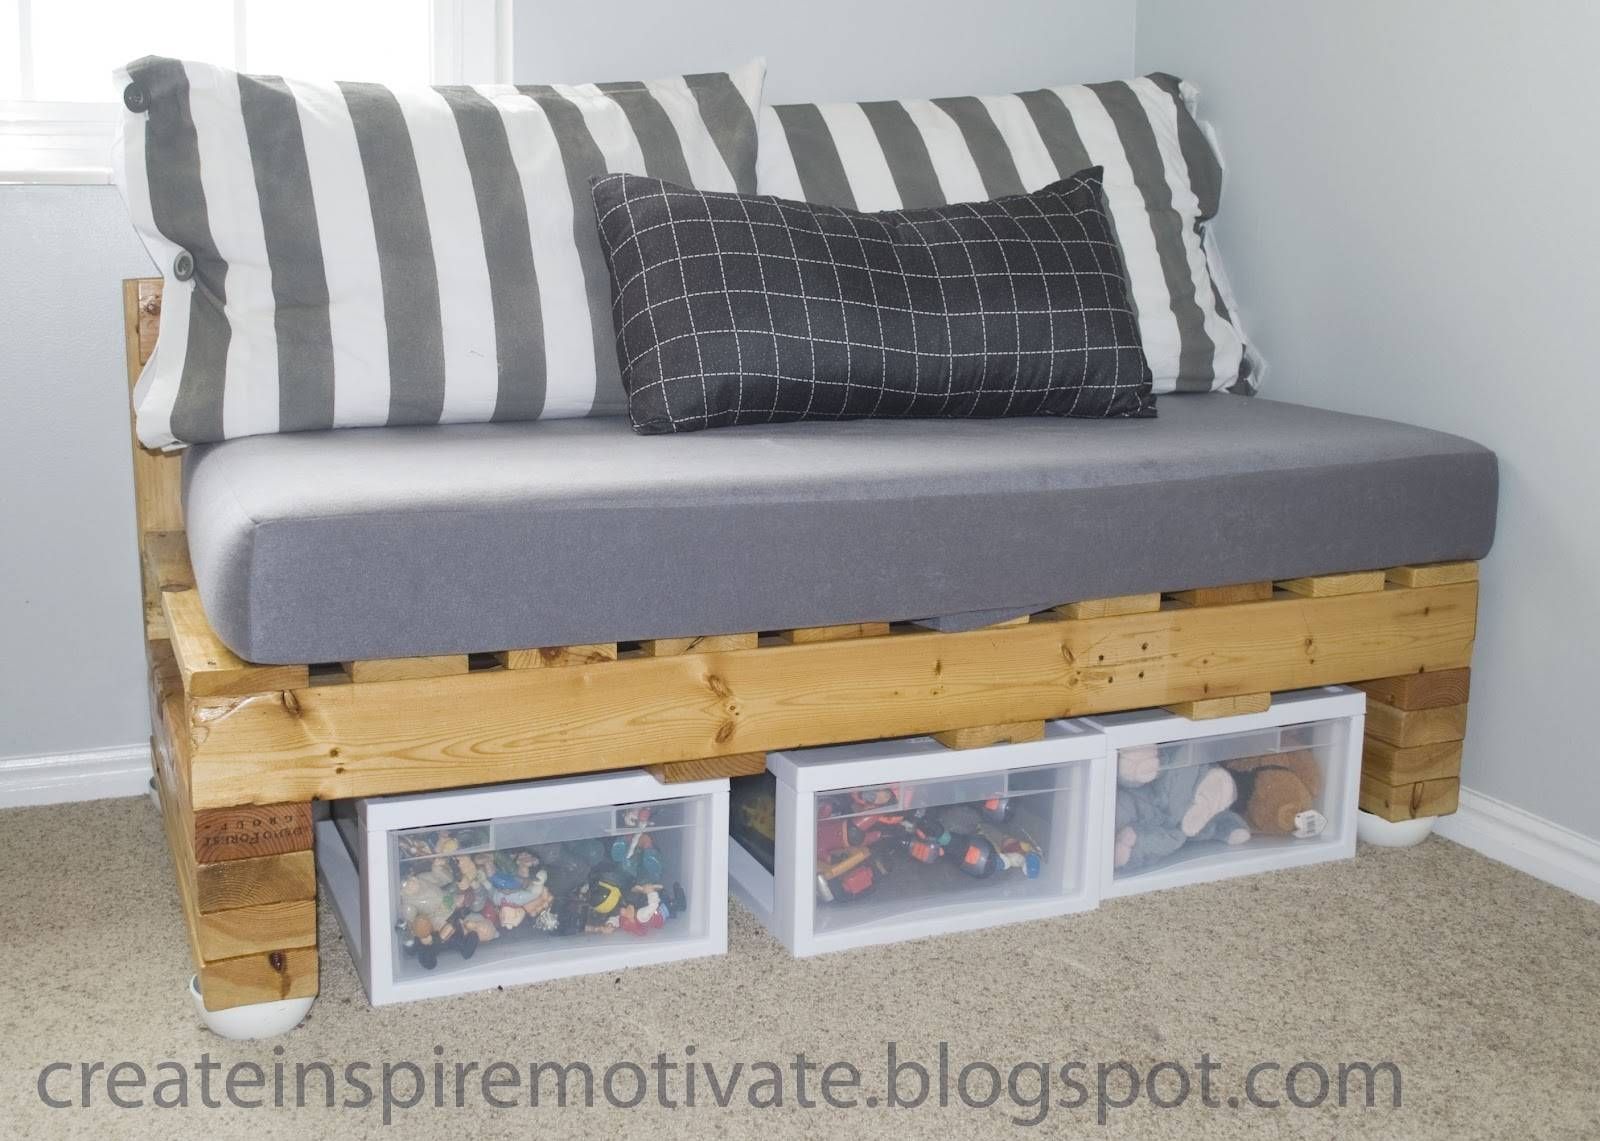 Furniture : Classy Minimalist Wood Pallet Sofa Idea With Grey With Regard To Pallet Sofas (View 15 of 15)